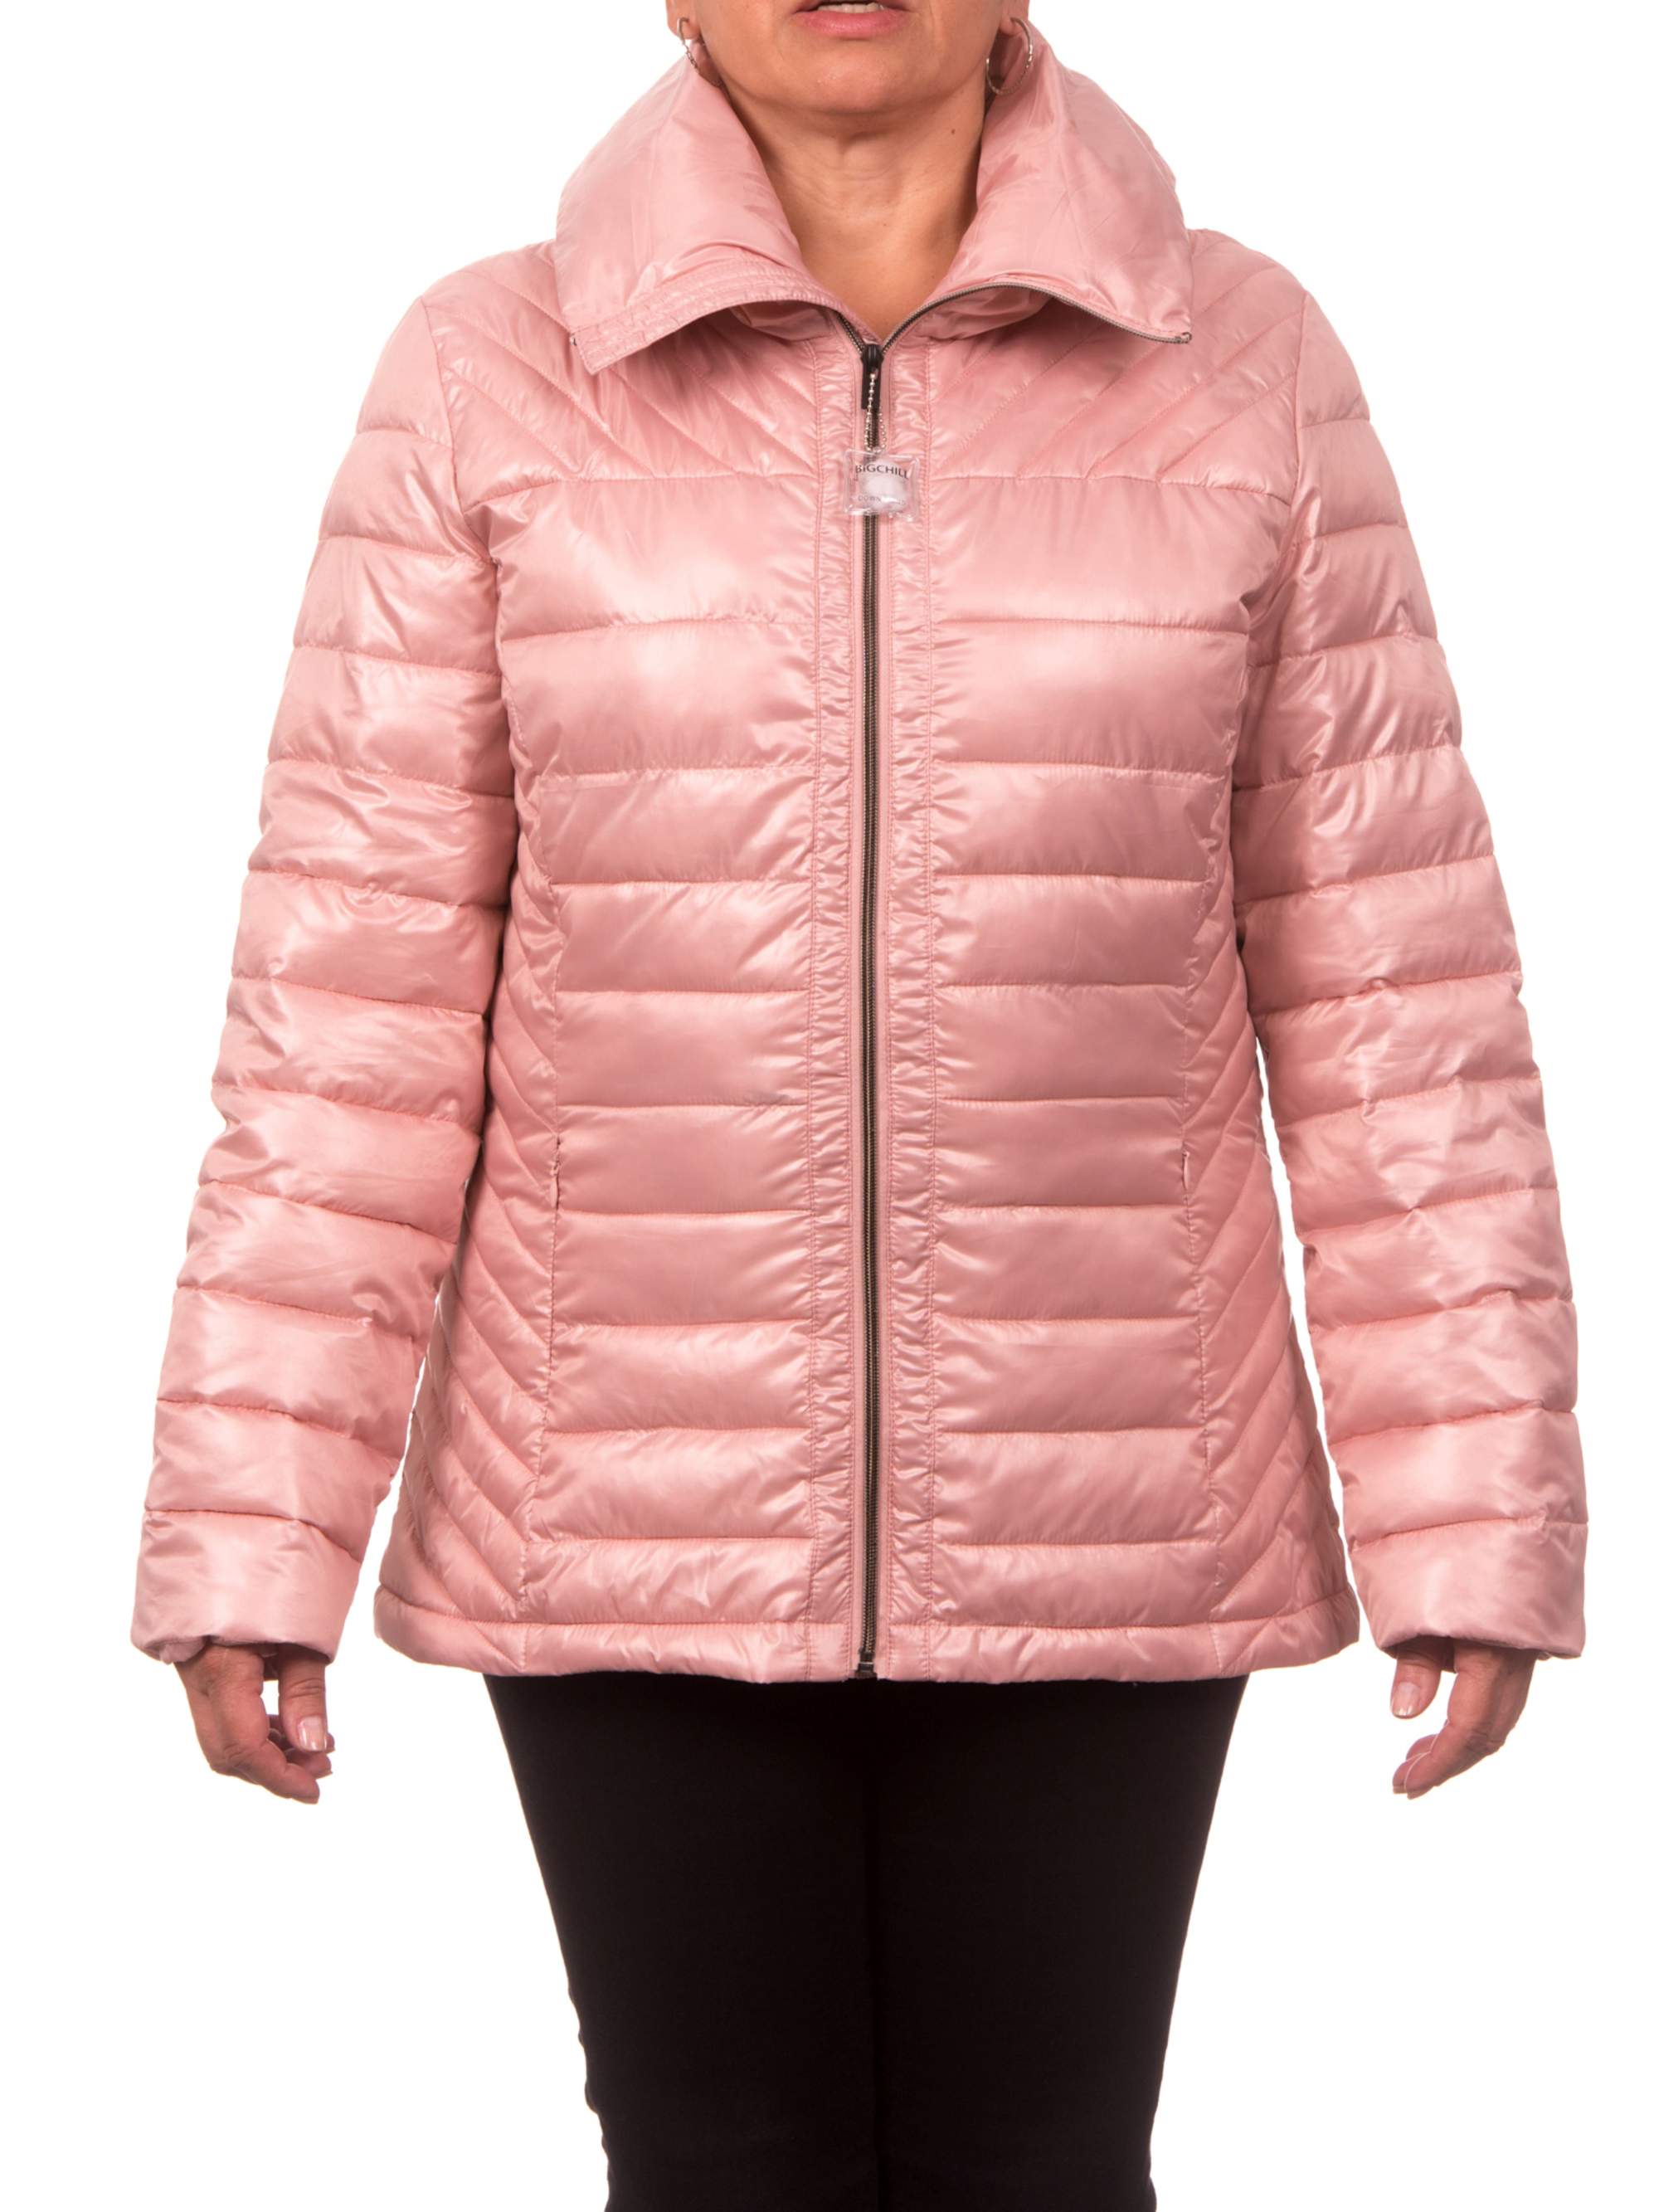 Women's Down Blend Quilted Jacket with Convertible Collar - image 1 of 2